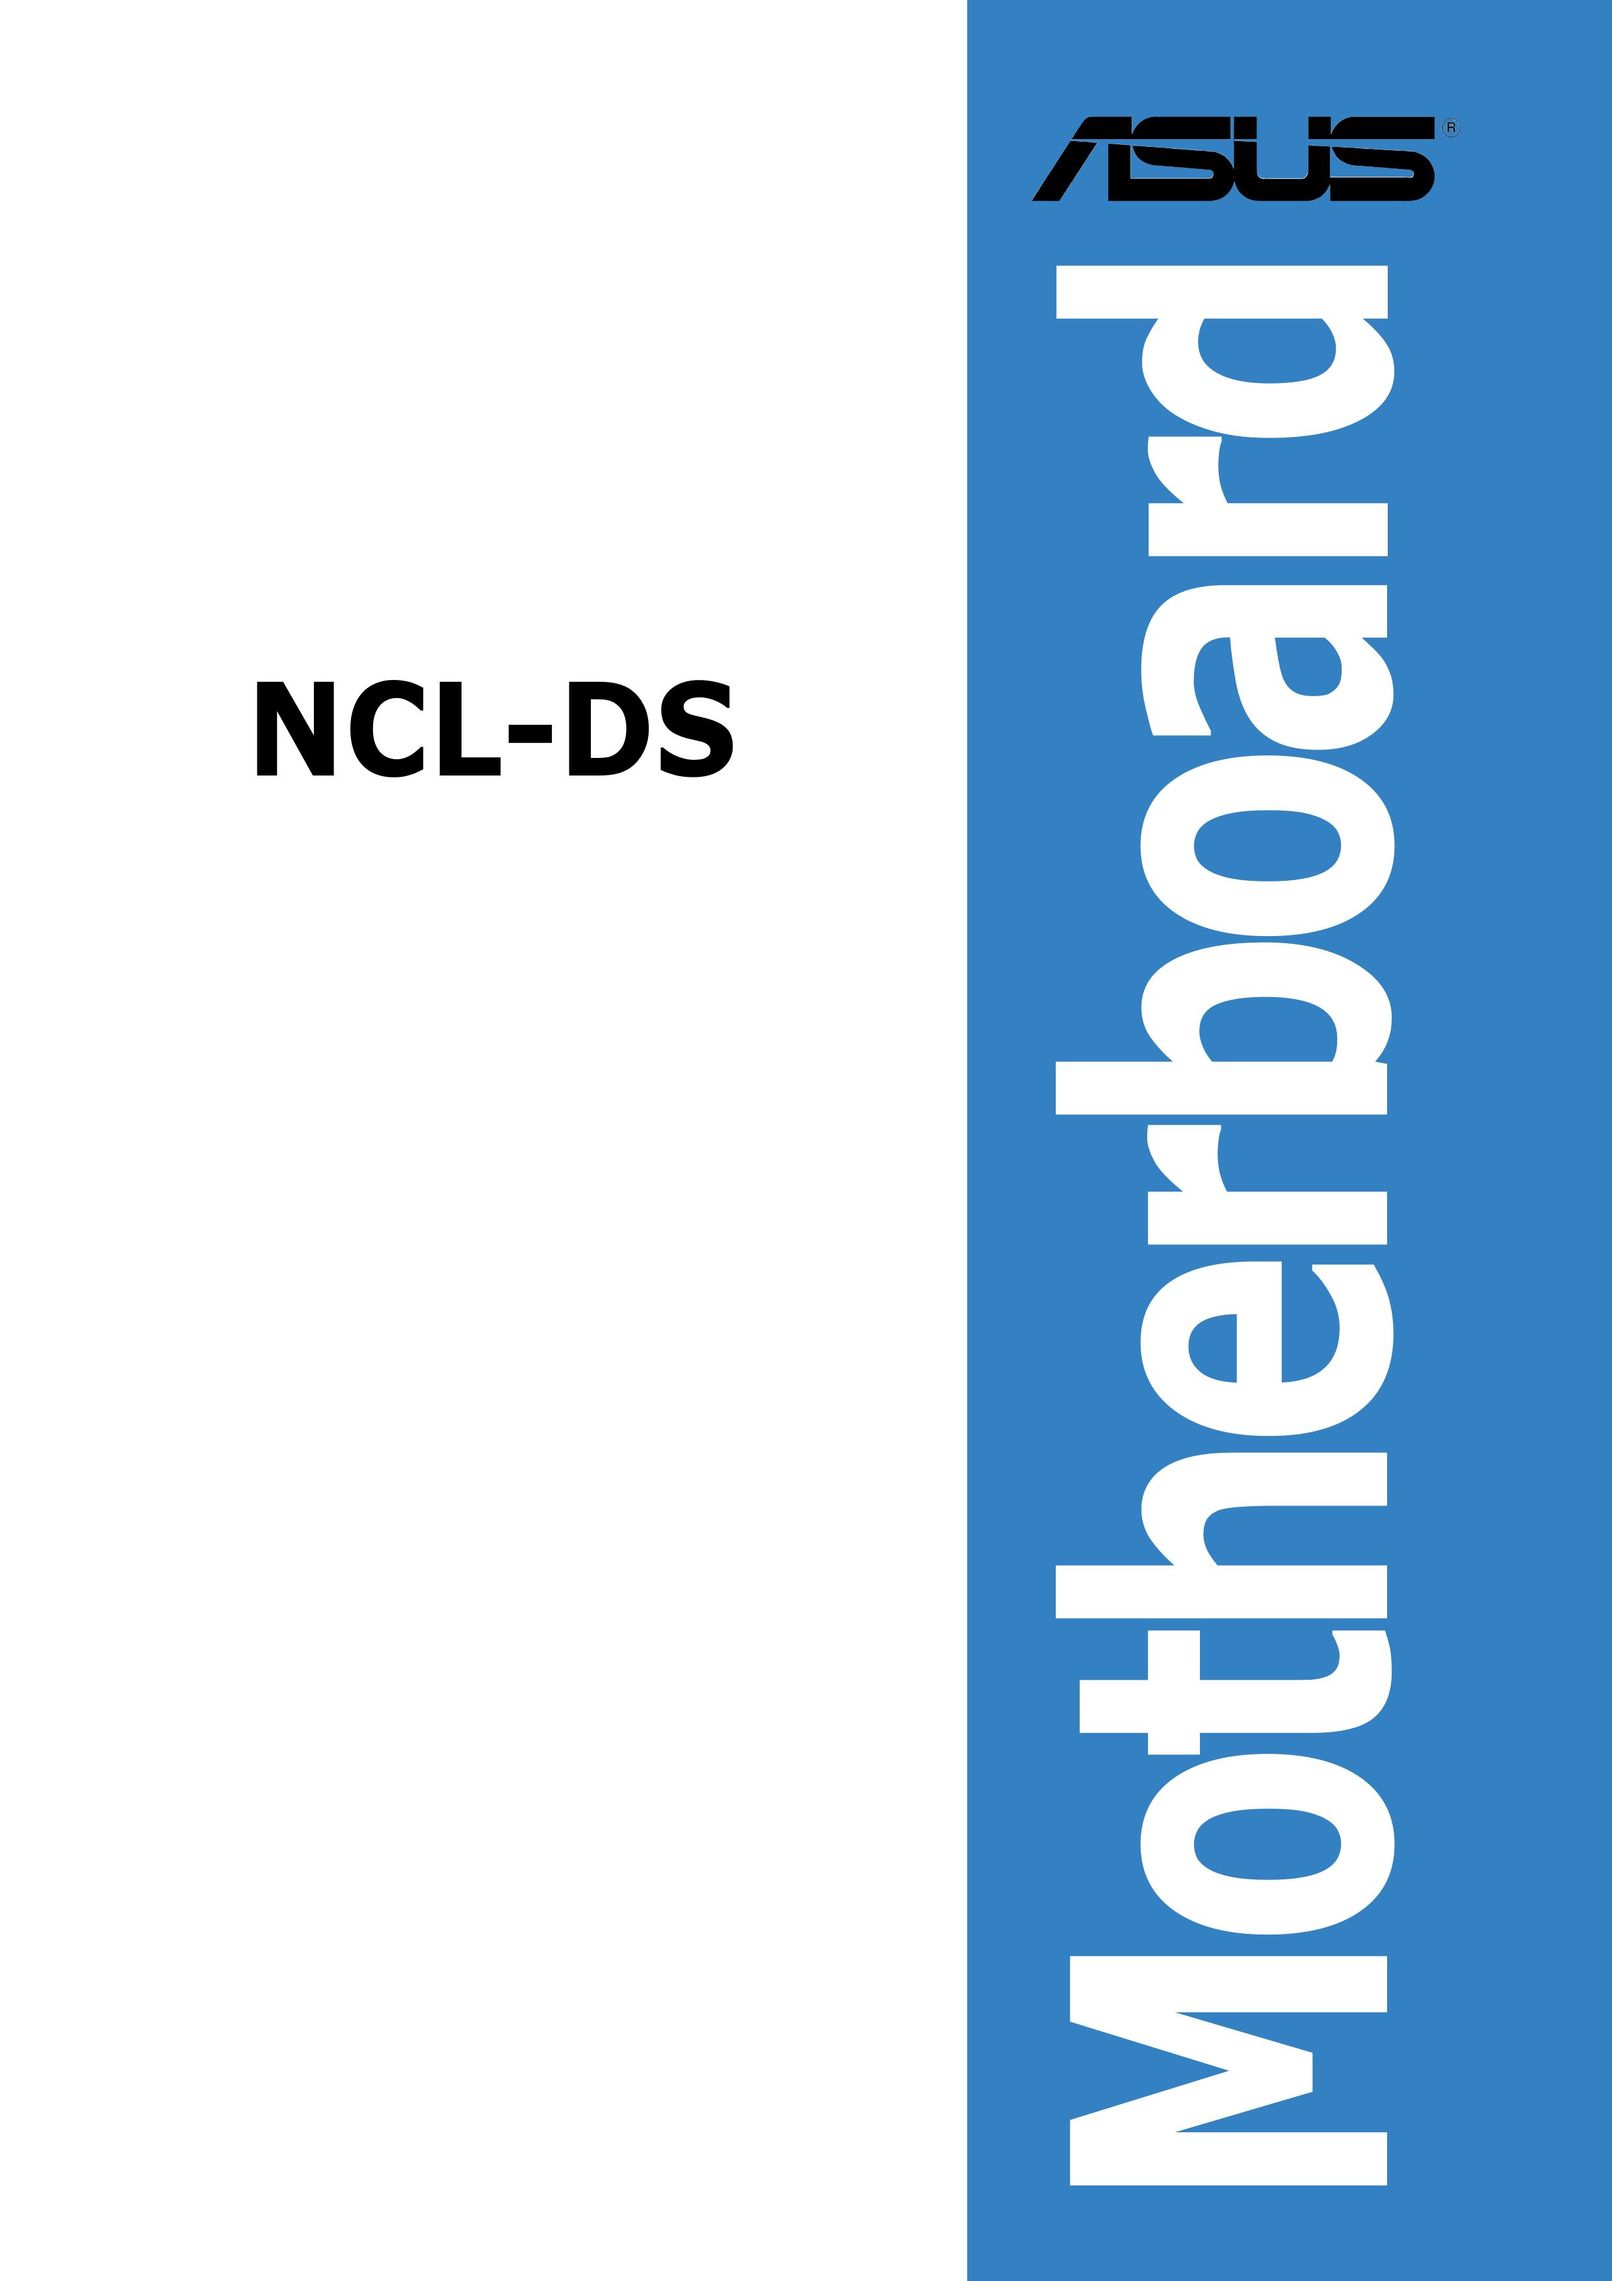 Asus NCL-DS Network Card User Manual